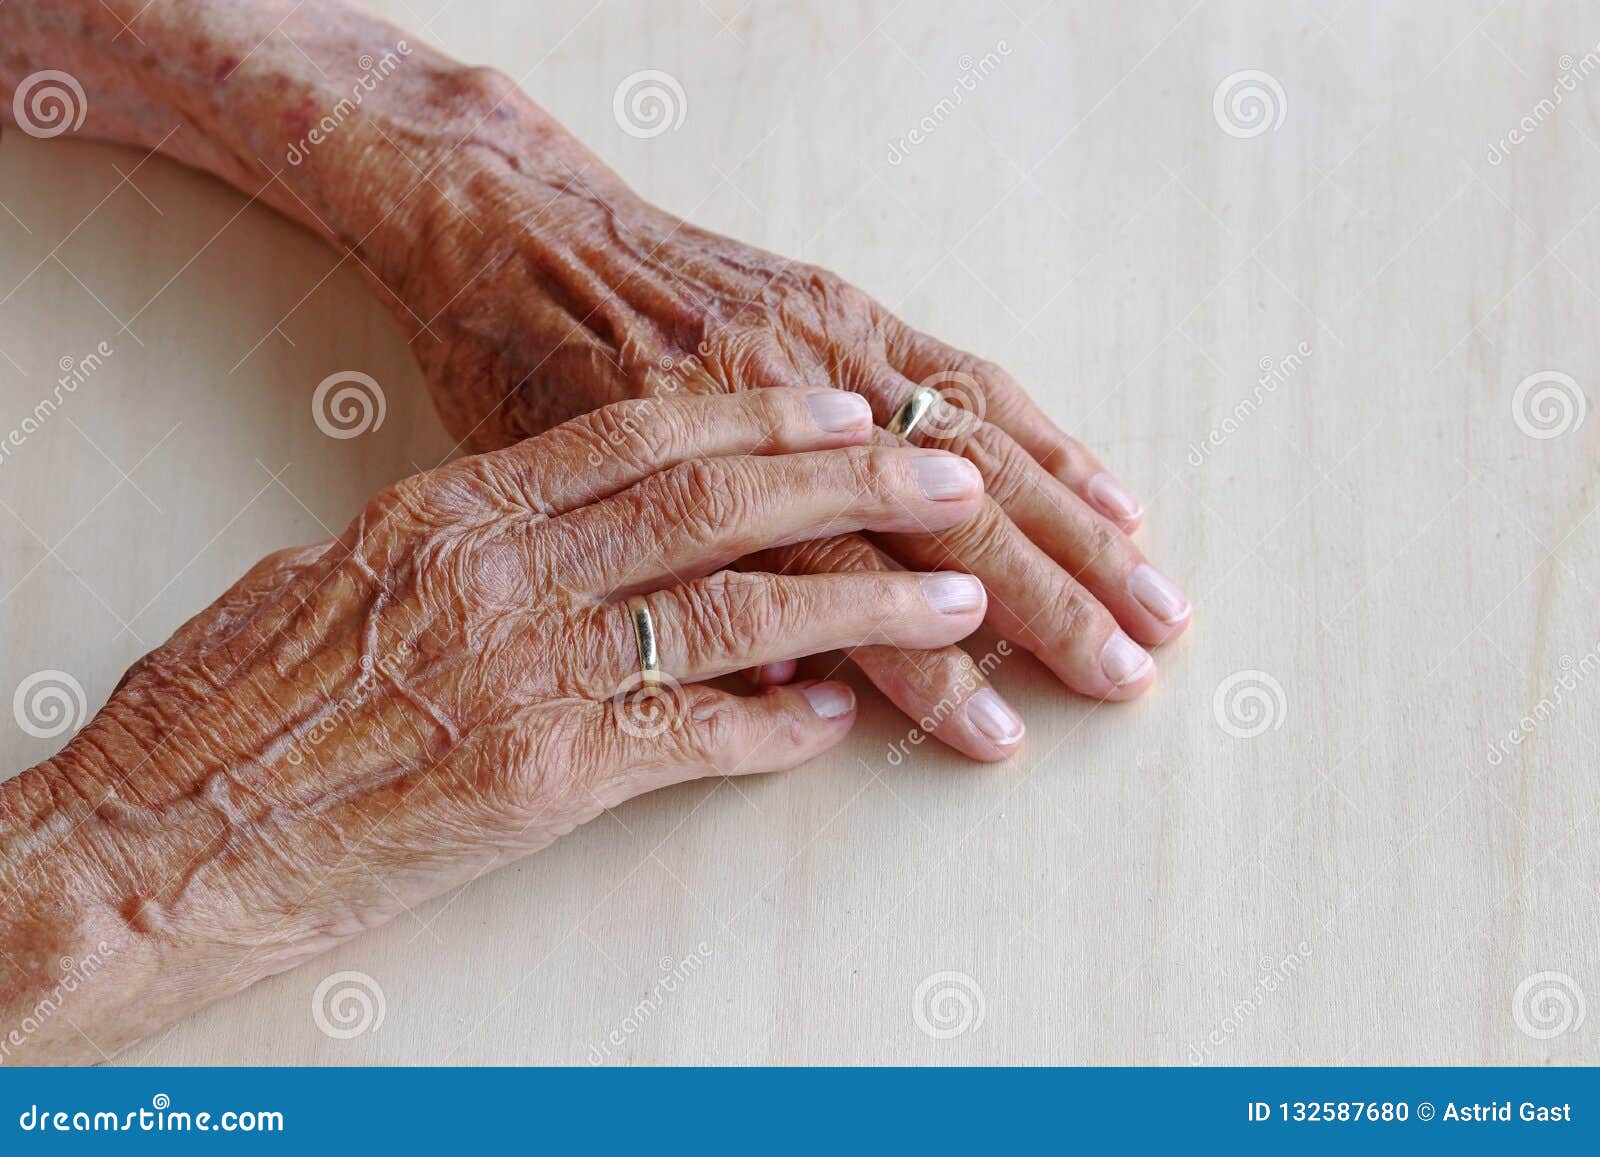 the hands of a very old woman